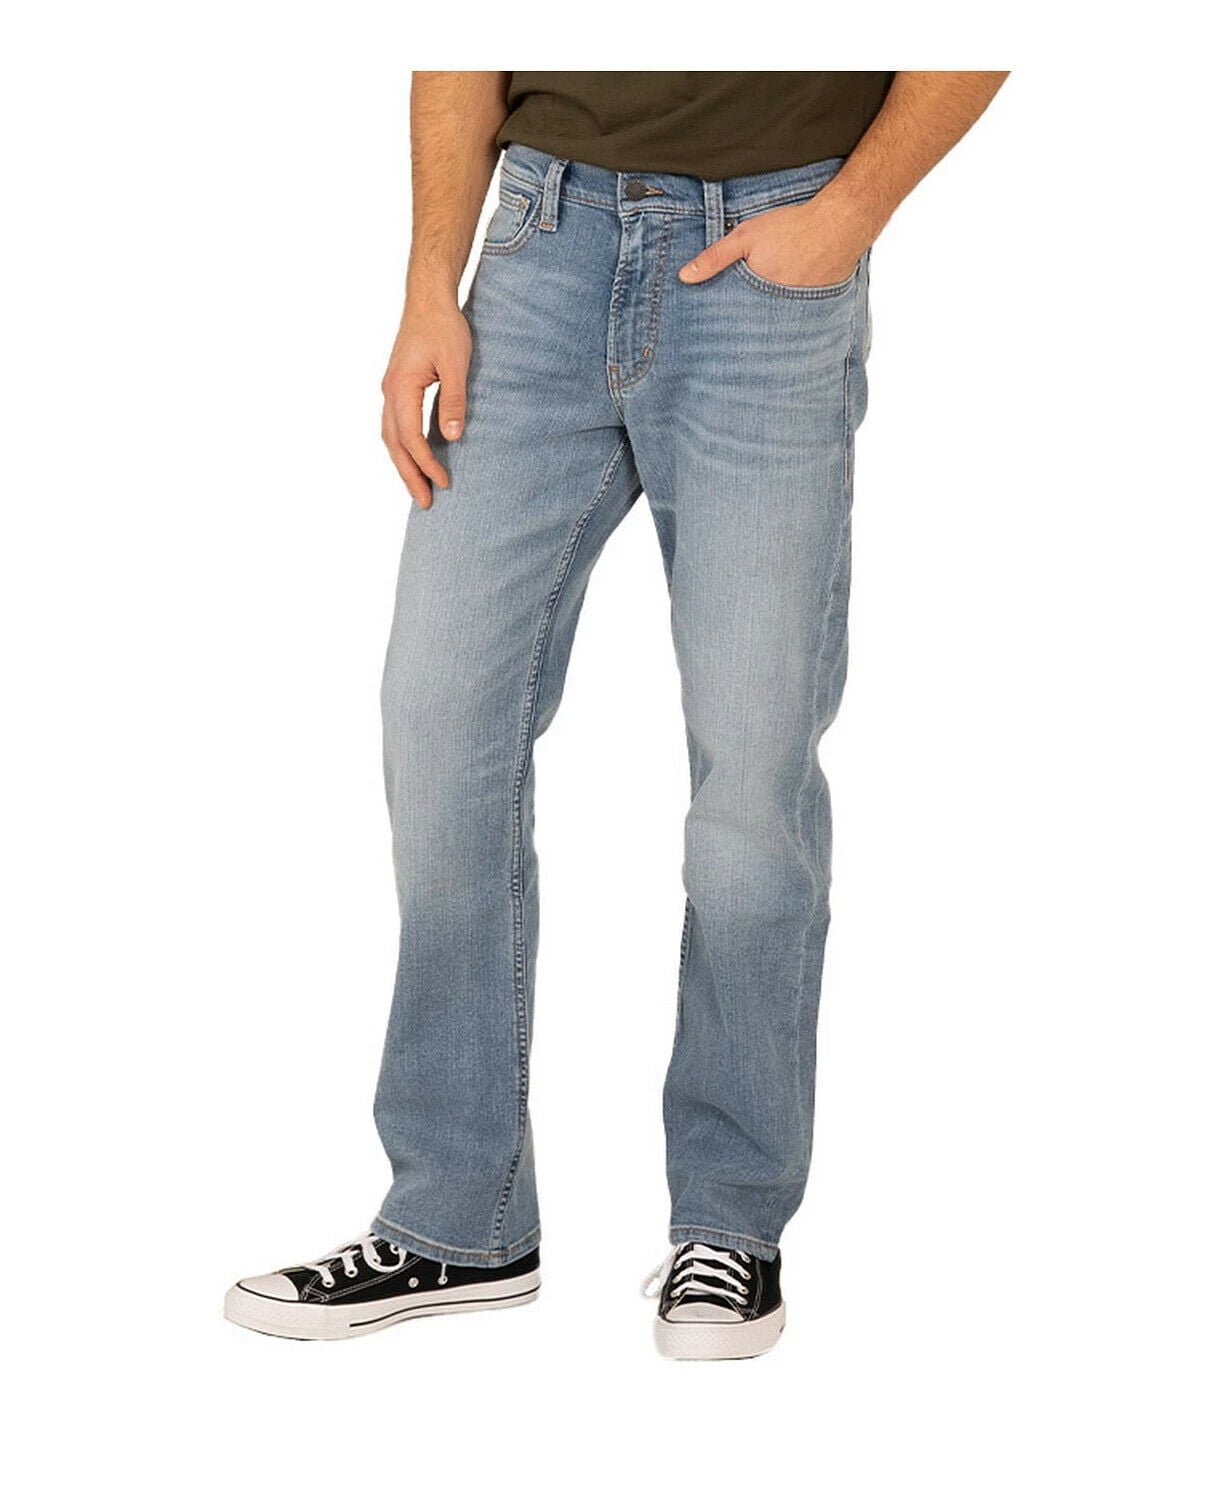 Authentic by Silver Jeans Co. Men's Relaxed Fit Straight Leg Jean, Waist  Sizes 28-44 - Walmart.com